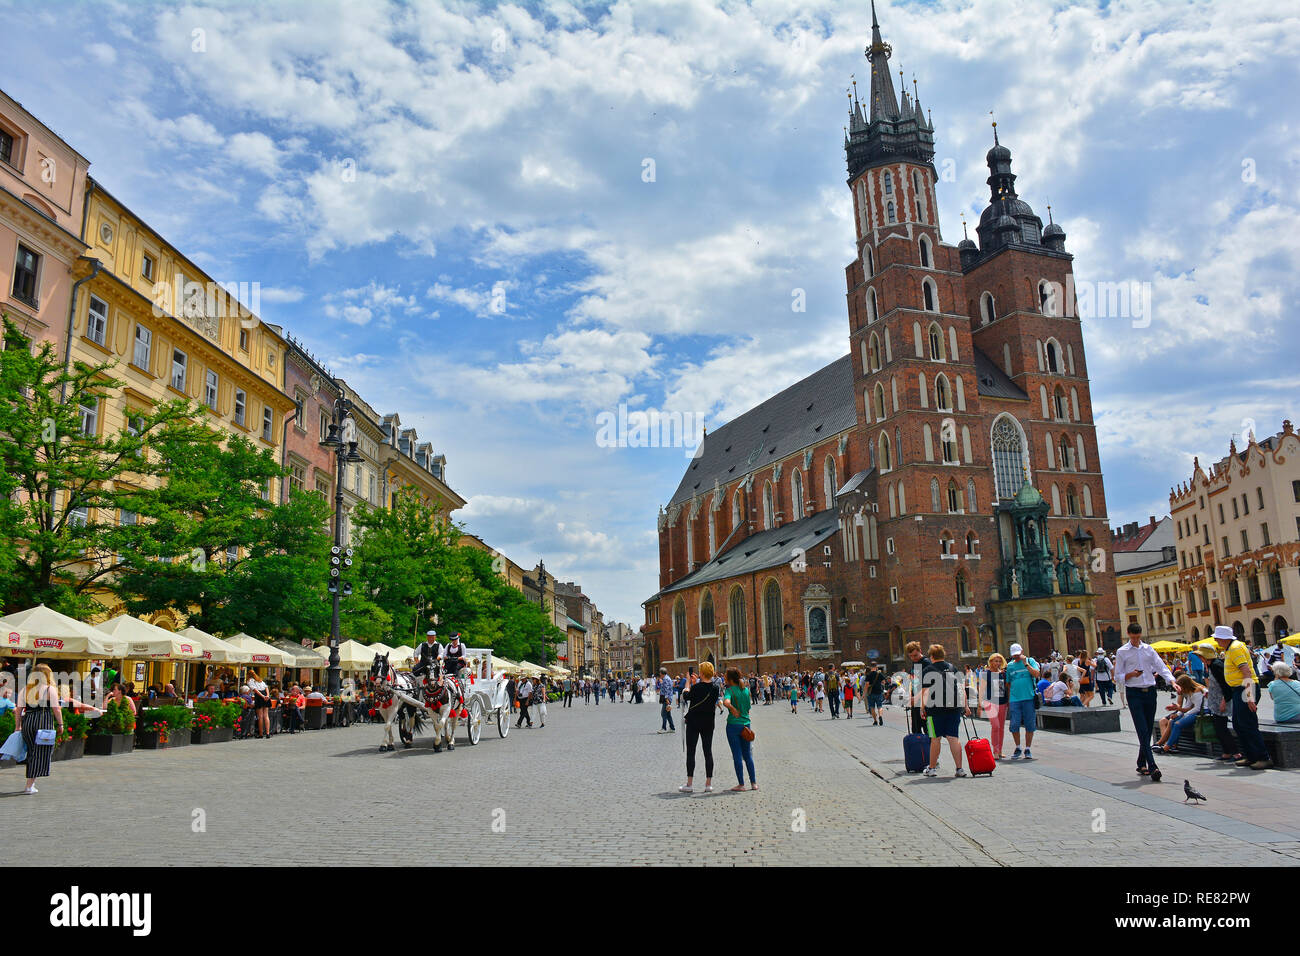 Krakow, Poland - July 8th 2018. St Marys Basilica in Krakow, also known as the Church of Our Lady Assumed into Heaven Stock Photo